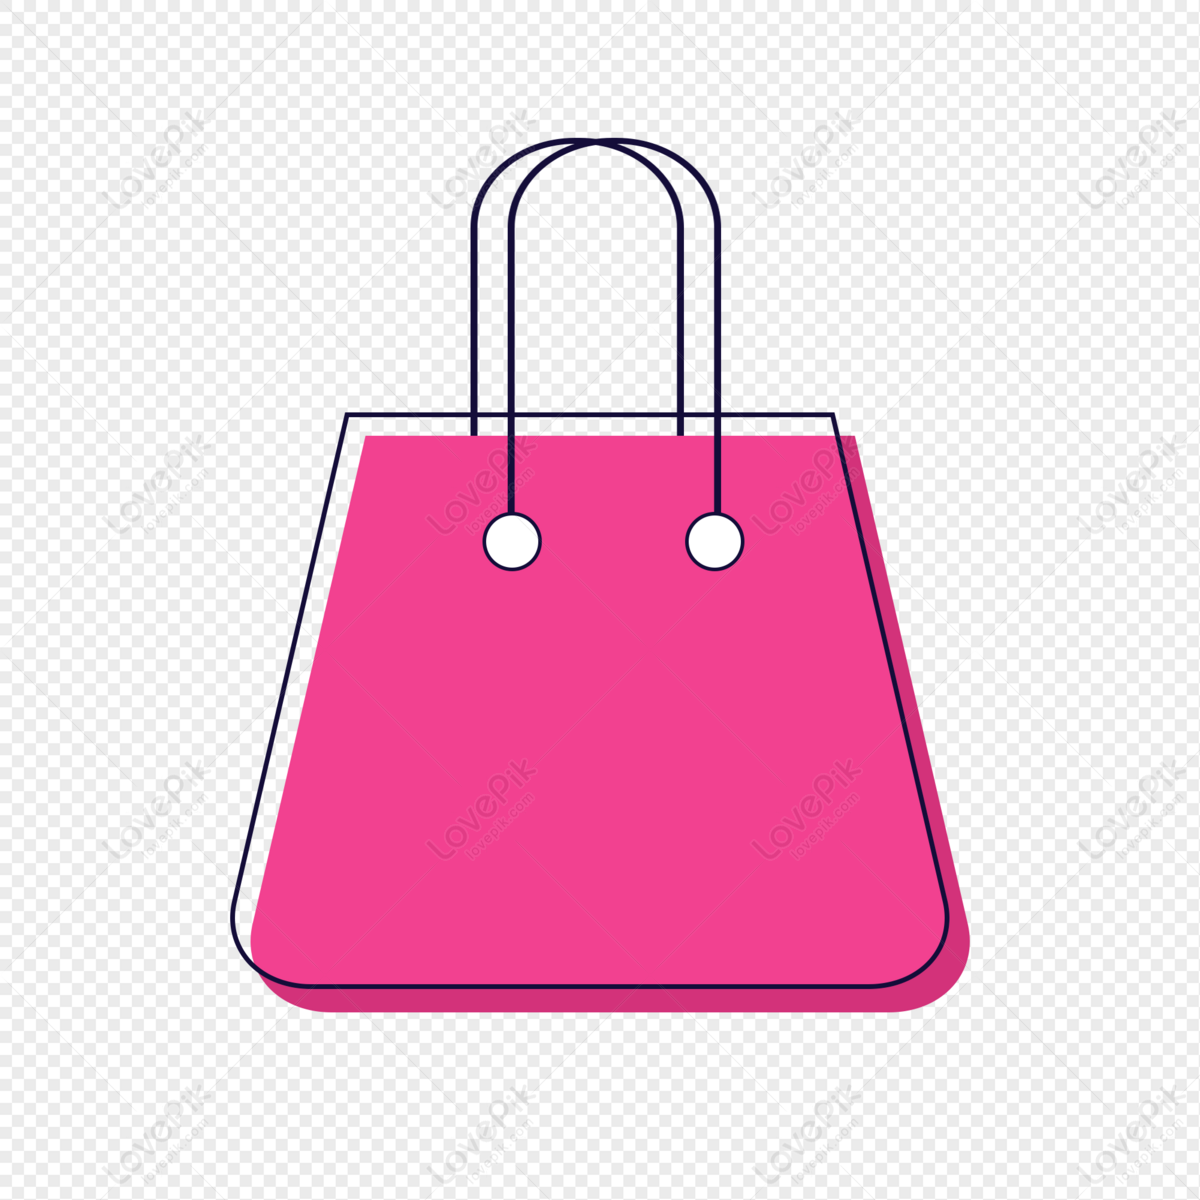 Shopping Bag Line Vector Icon On Transparent Background Royalty Free SVG,  Cliparts, Vectors, and Stock Illustration. Image 53562974.